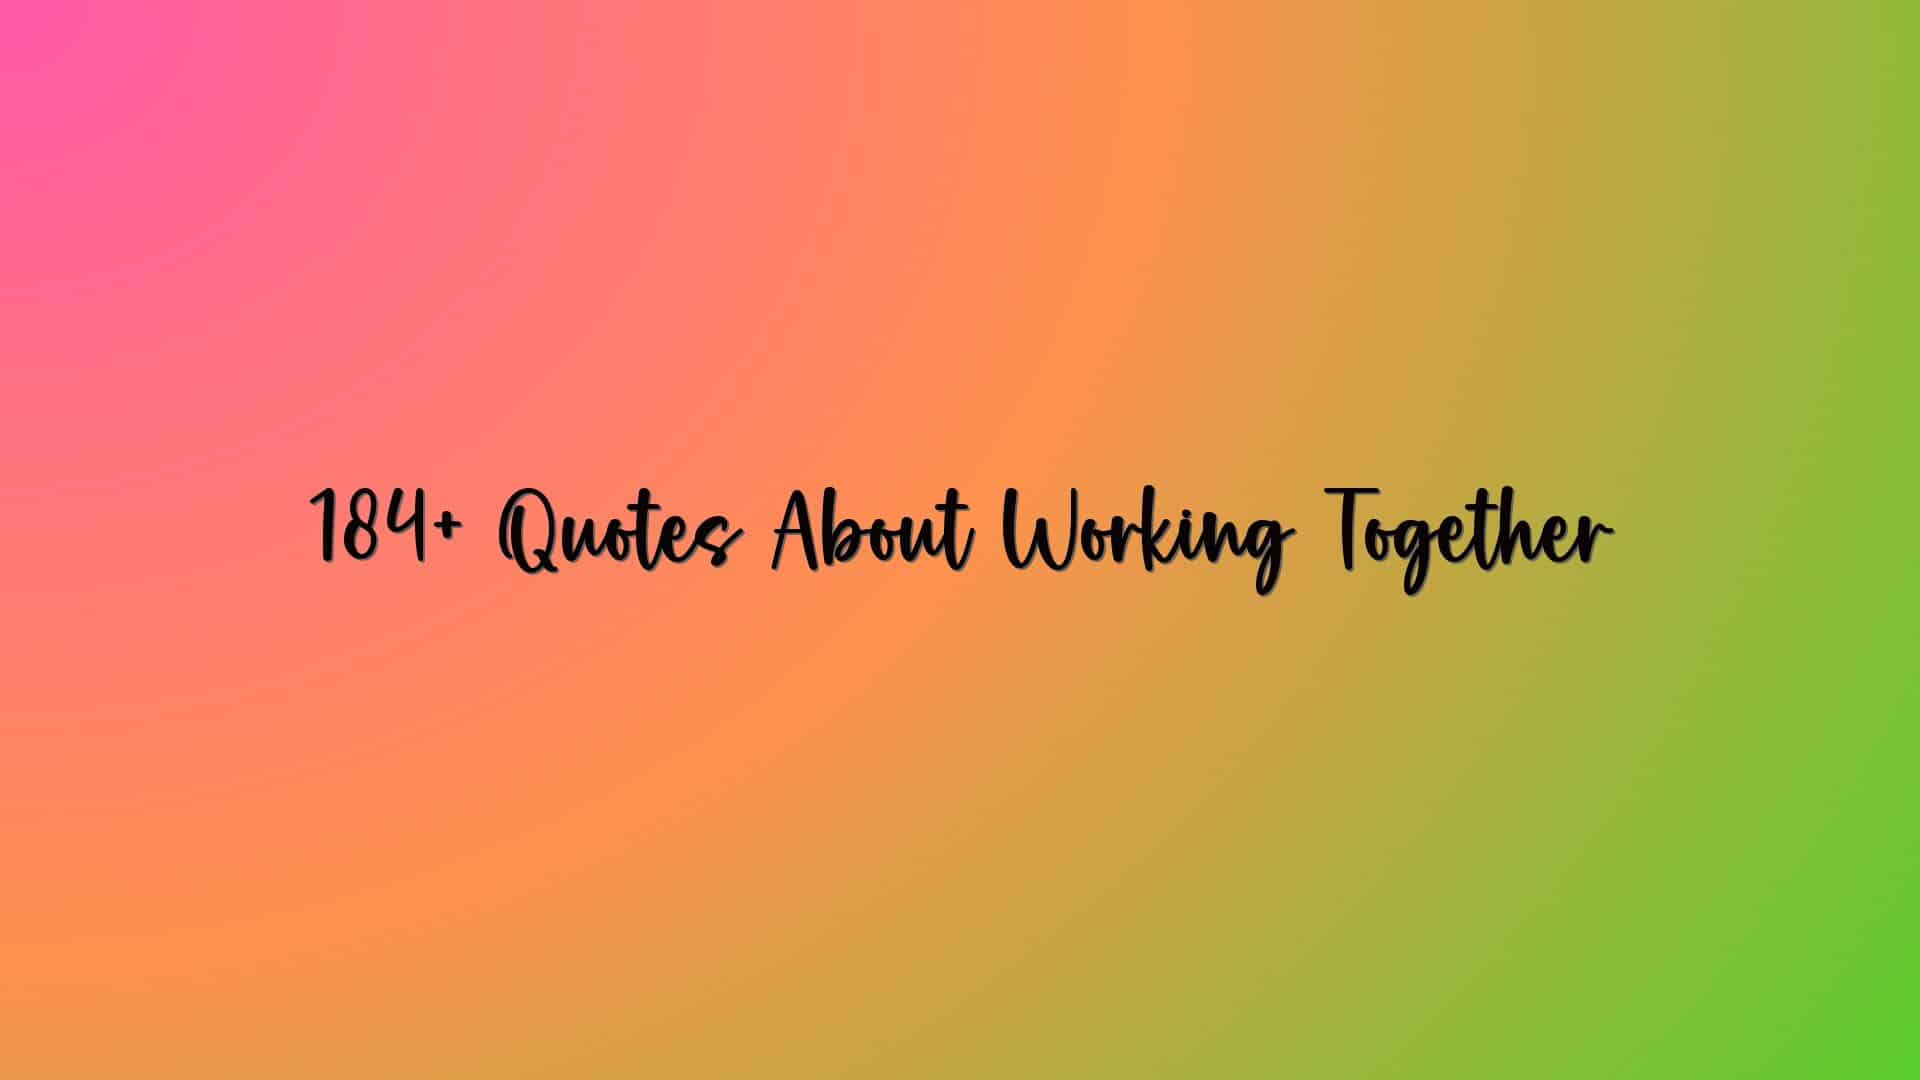 184+ Quotes About Working Together